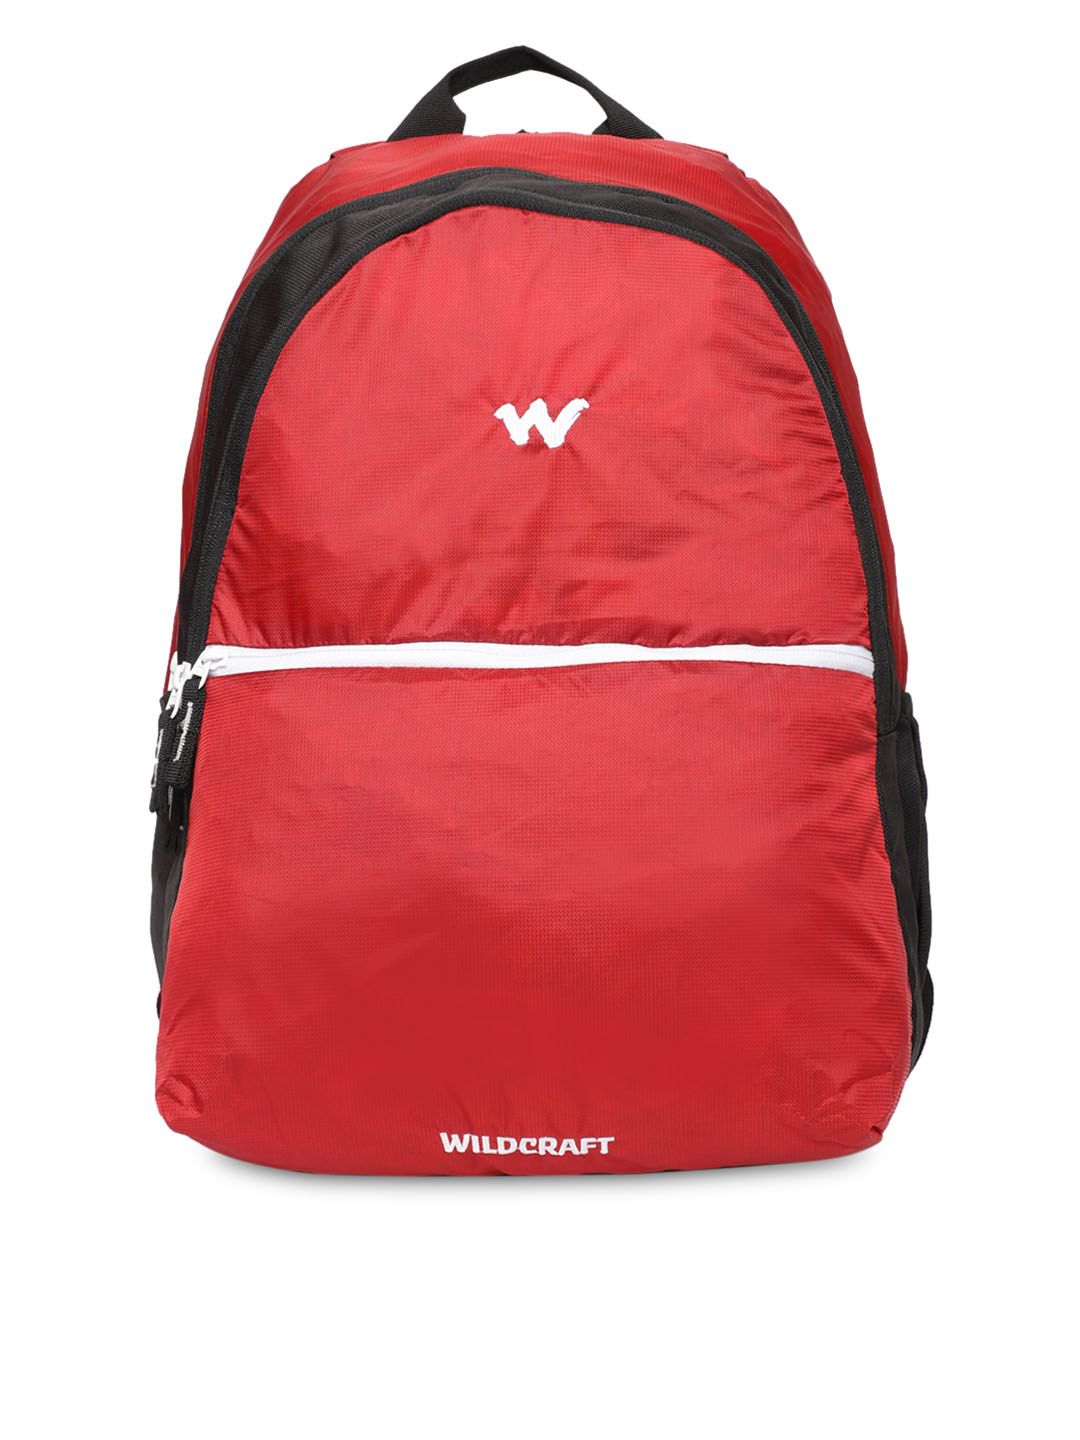 Wildcraft Unisex Red & Black Solid Backpack Price in India